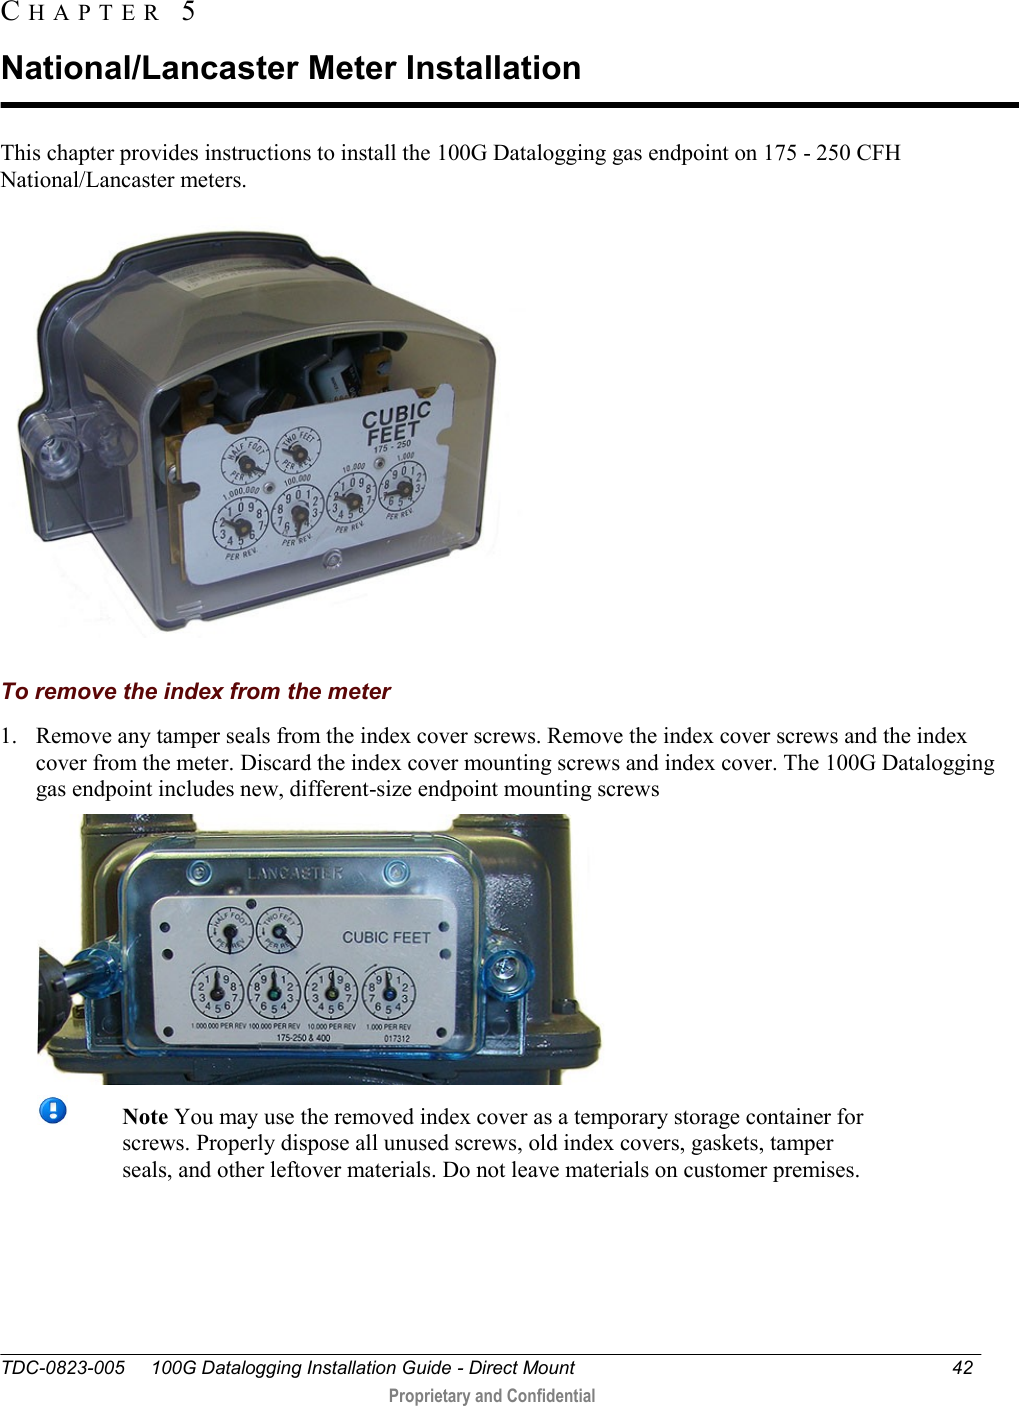  TDC-0823-005     100G Datalogging Installation Guide - Direct Mount  42   Proprietary and Confidential     This chapter provides instructions to install the 100G Datalogging gas endpoint on 175 - 250 CFH National/Lancaster meters.    To remove the index from the meter 1. Remove any tamper seals from the index cover screws. Remove the index cover screws and the index cover from the meter. Discard the index cover mounting screws and index cover. The 100G Datalogging gas endpoint includes new, different-size endpoint mounting screws    Note You may use the removed index cover as a temporary storage container for screws. Properly dispose all unused screws, old index covers, gaskets, tamper seals, and other leftover materials. Do not leave materials on customer premises.  CH A P T E R   5  National/Lancaster Meter Installation 